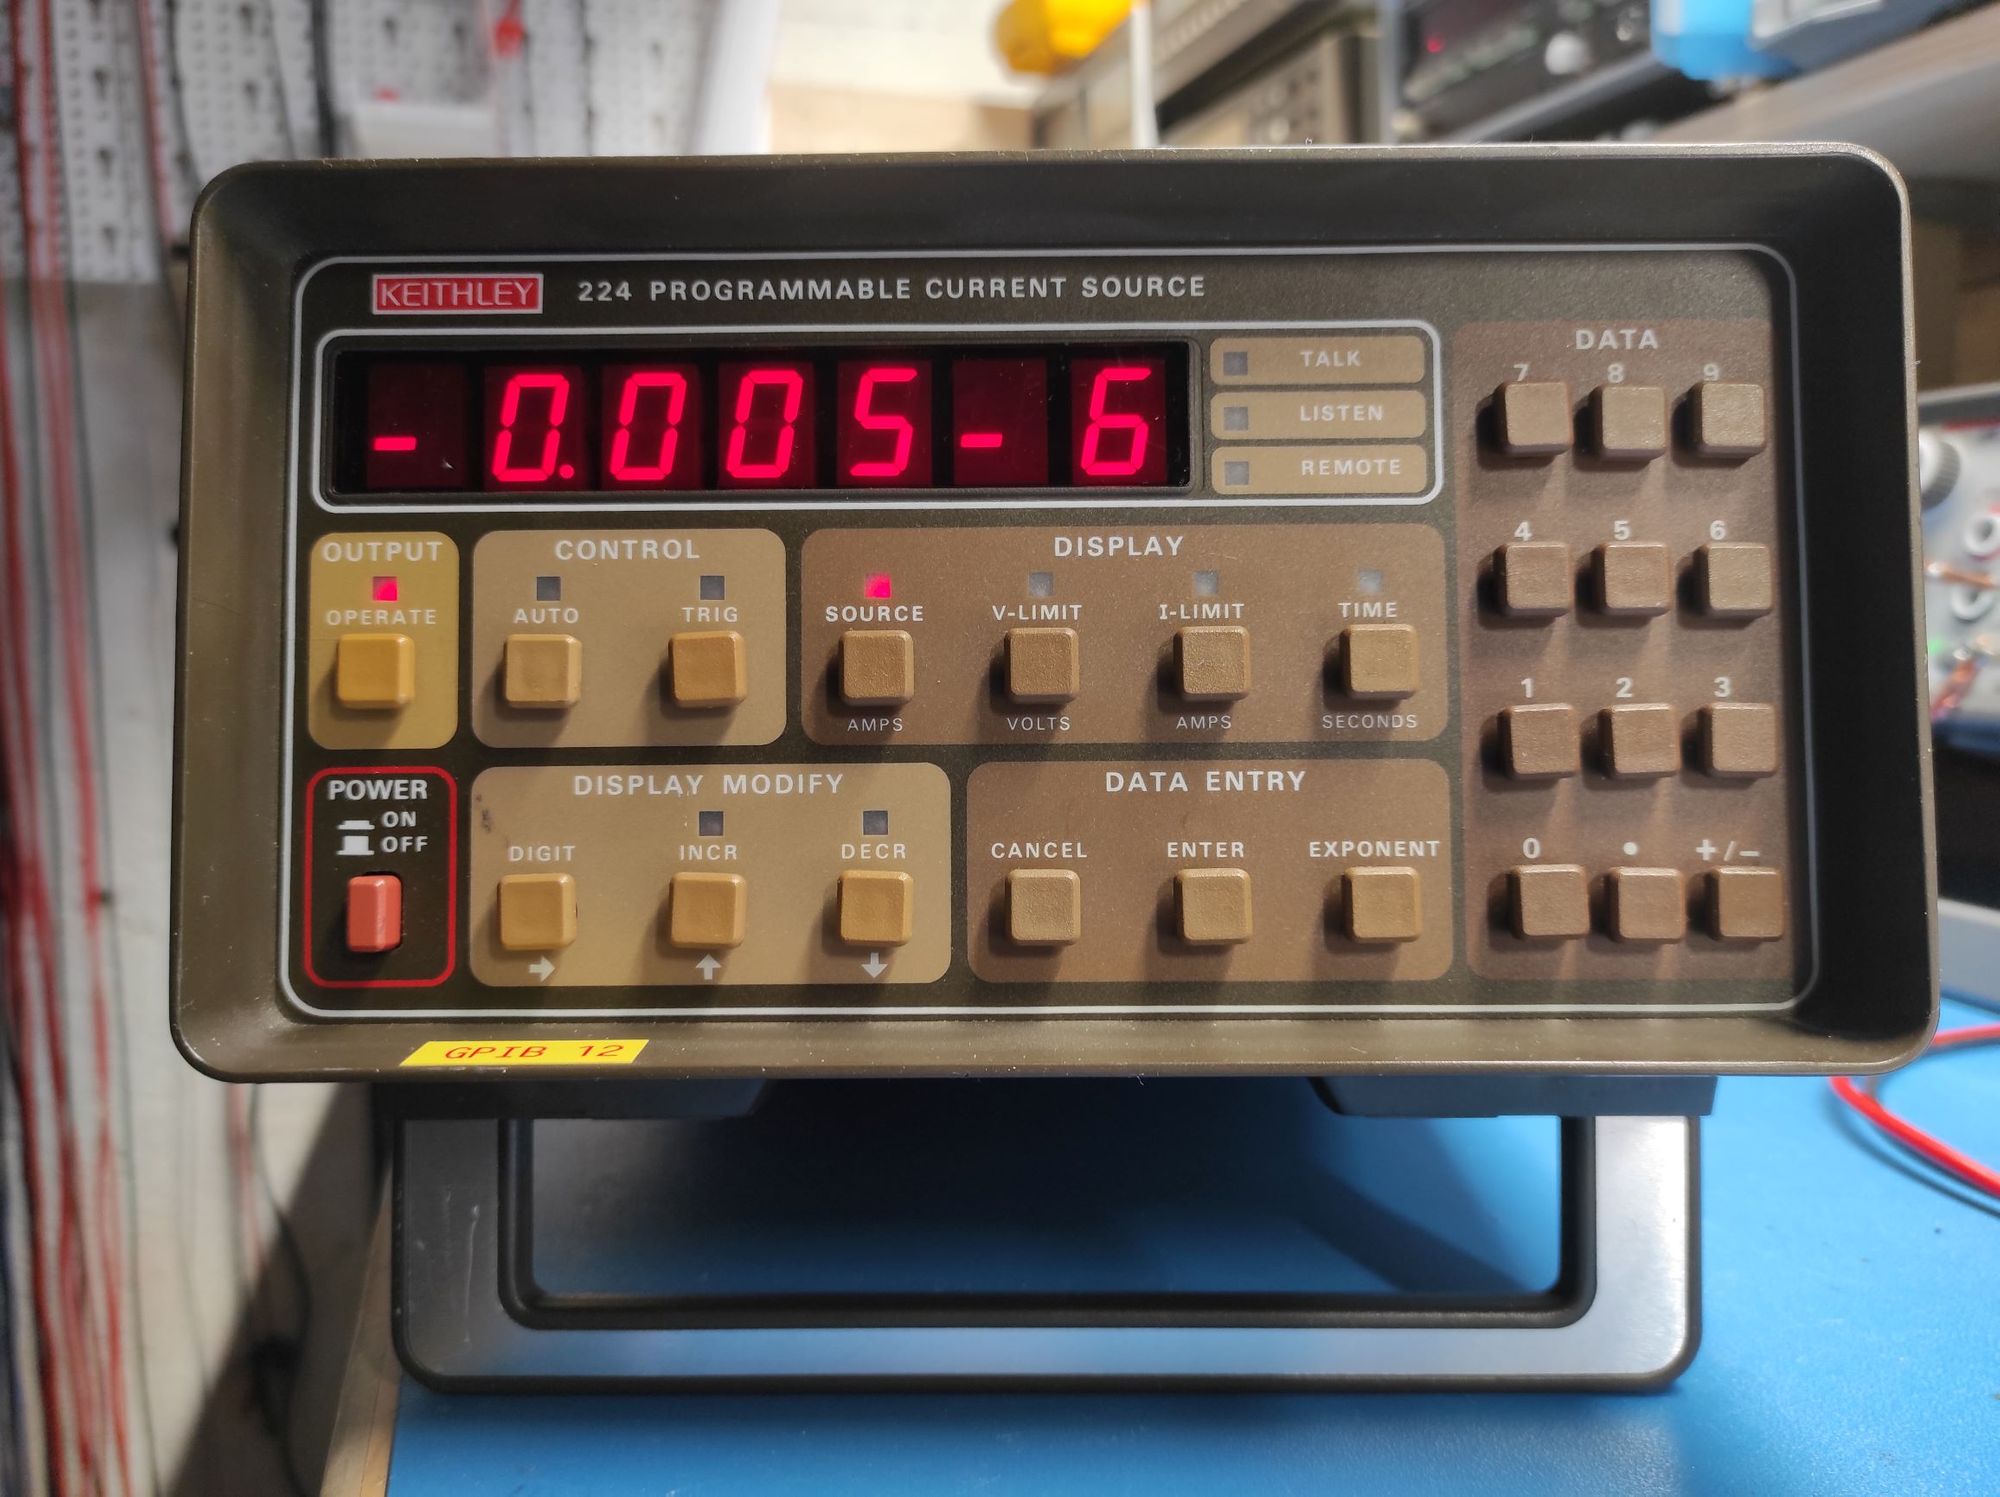 Keithley 224 Programmable Current Source - Compliance voltage limit repair